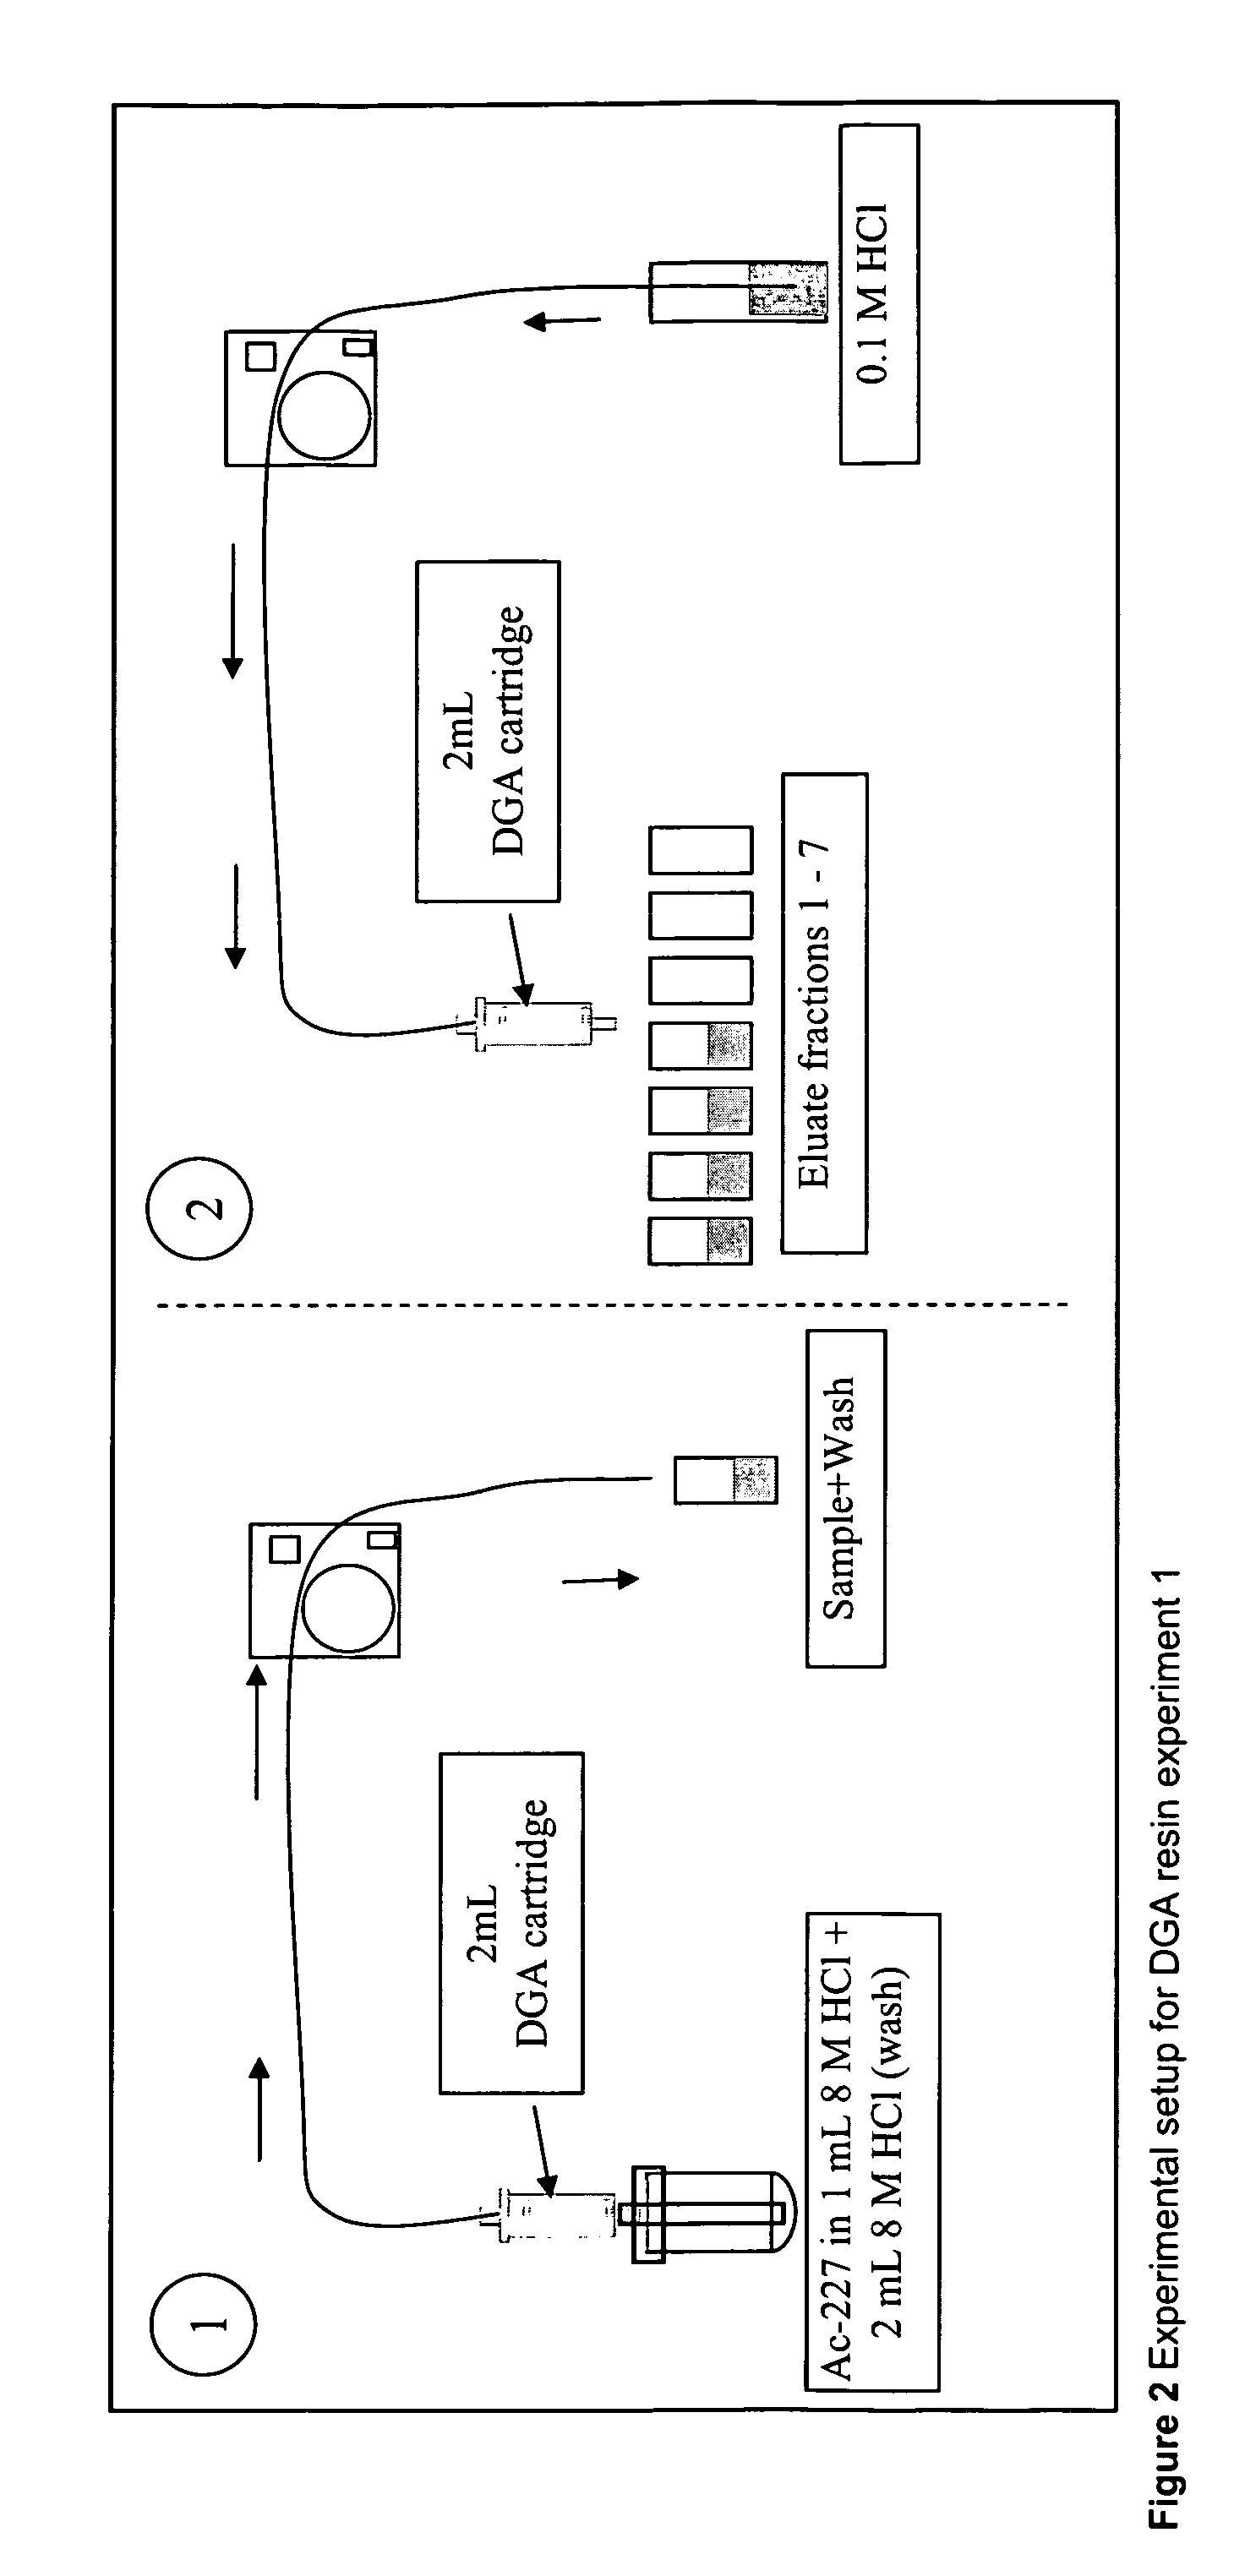 Isotope production method